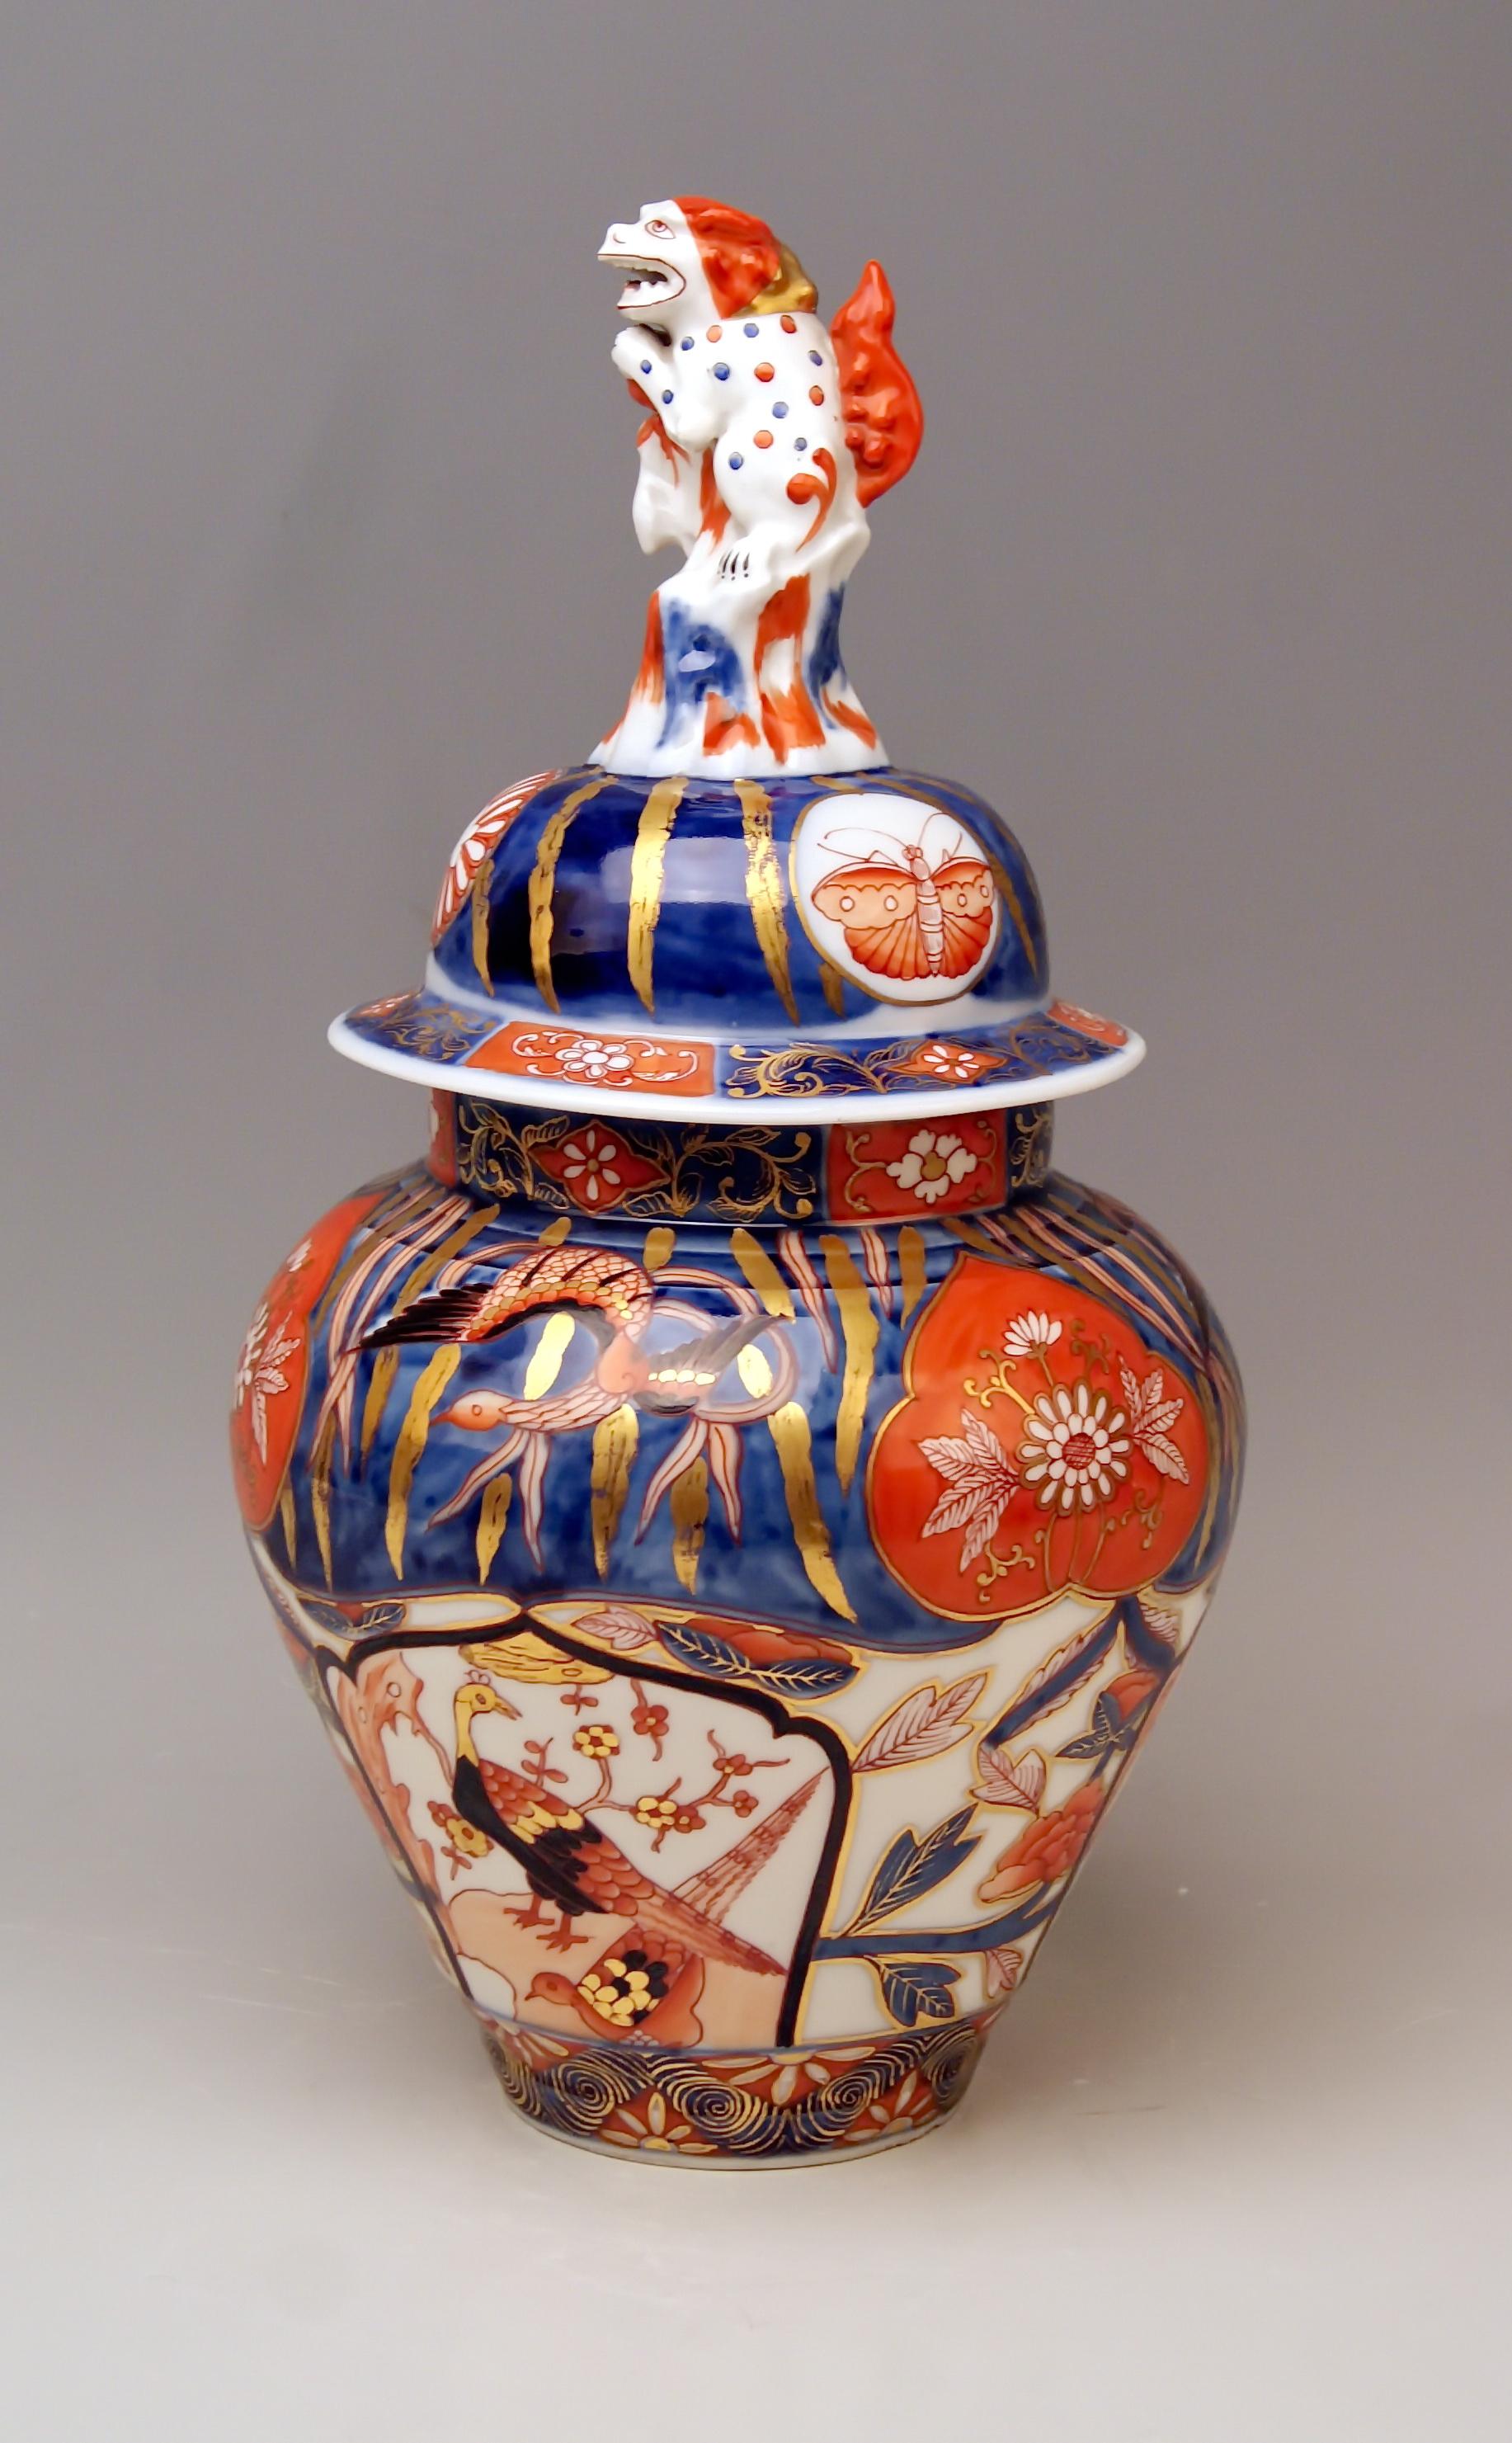 Lidded Bellied as well as rare Herend vase with stunning paintings of Chinese style.

Size:
Height 38.0 cm ( = 14.96 inches )
Diameter of vase's mouth 11.5 cm (= 4.52 inches)
Total diameter 20.0 cm (= 7.87 inches) 

Manufactory: Herend